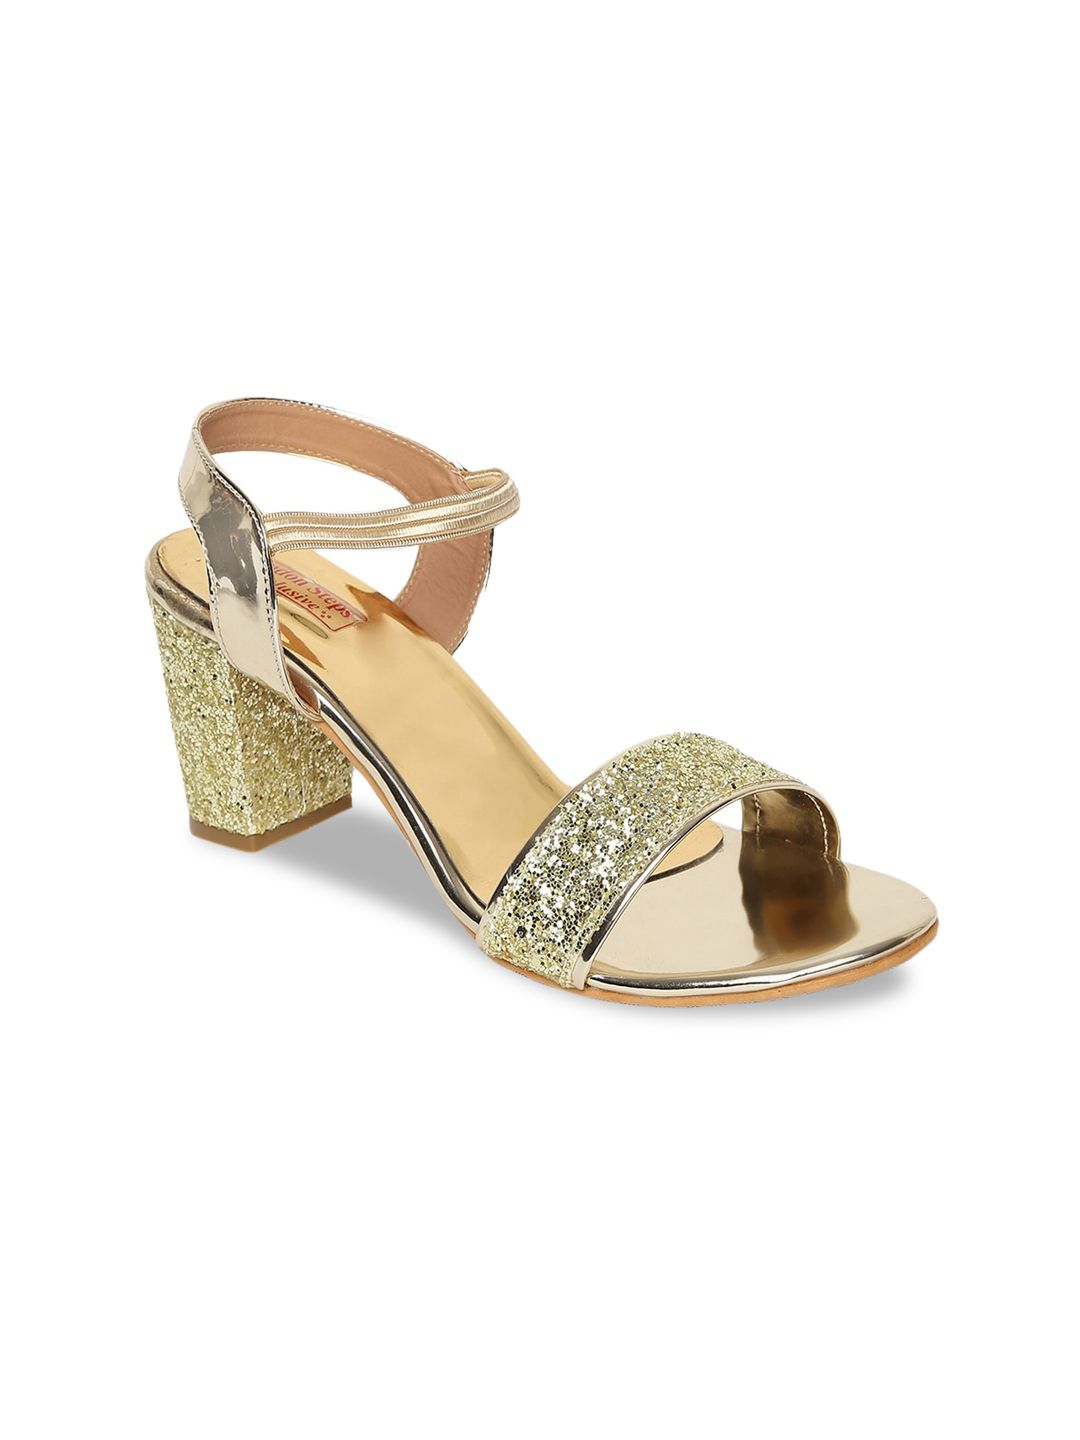 LONDON STEPS Women Gold-Toned Embellished Block Heels Price in India